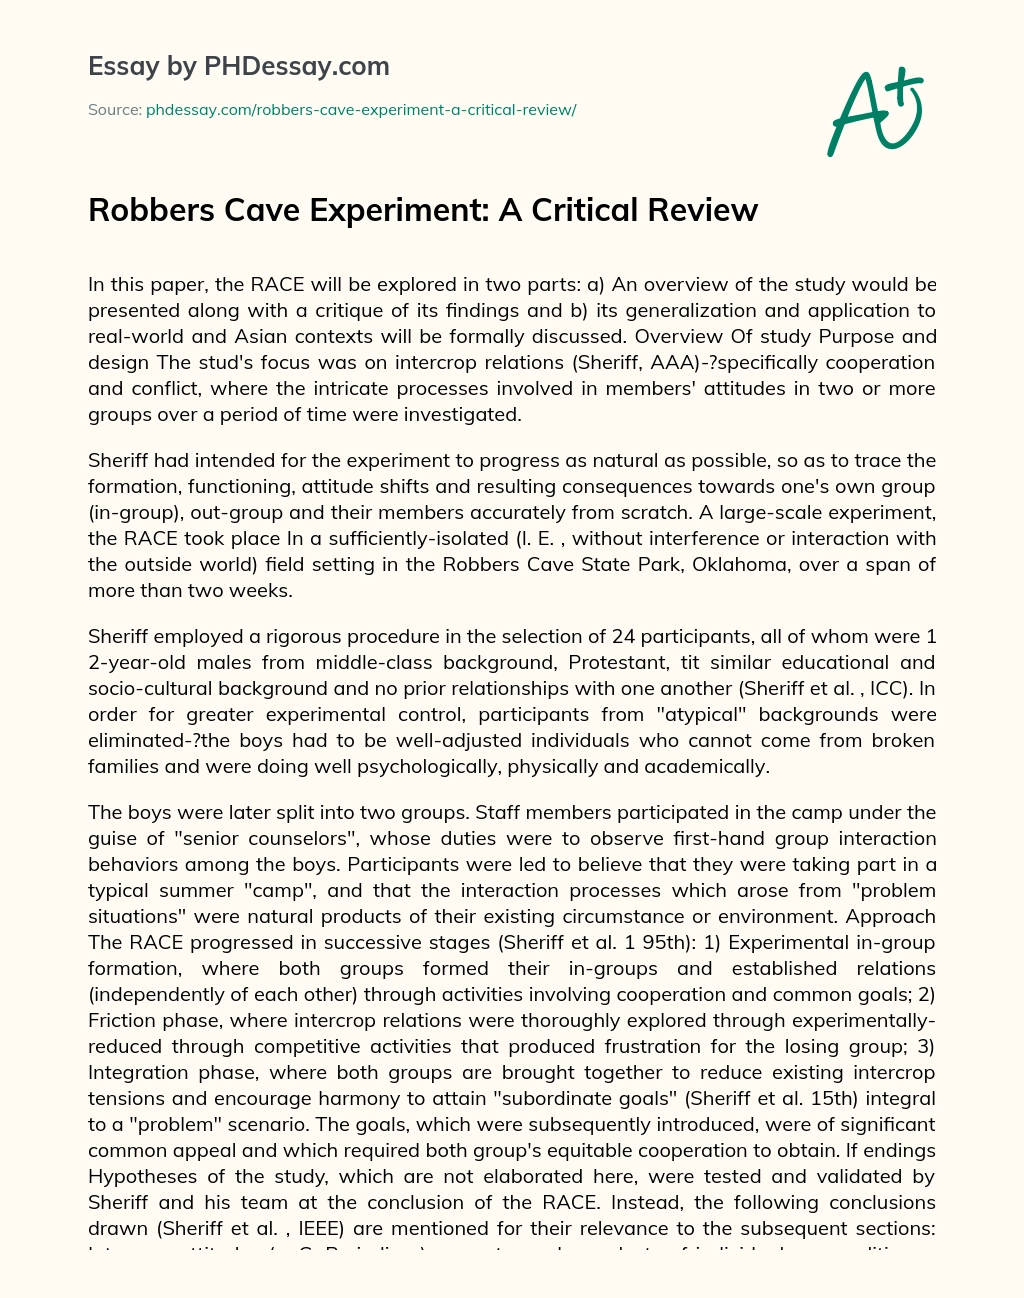 Robbers Cave Experiment: A Critical Review essay